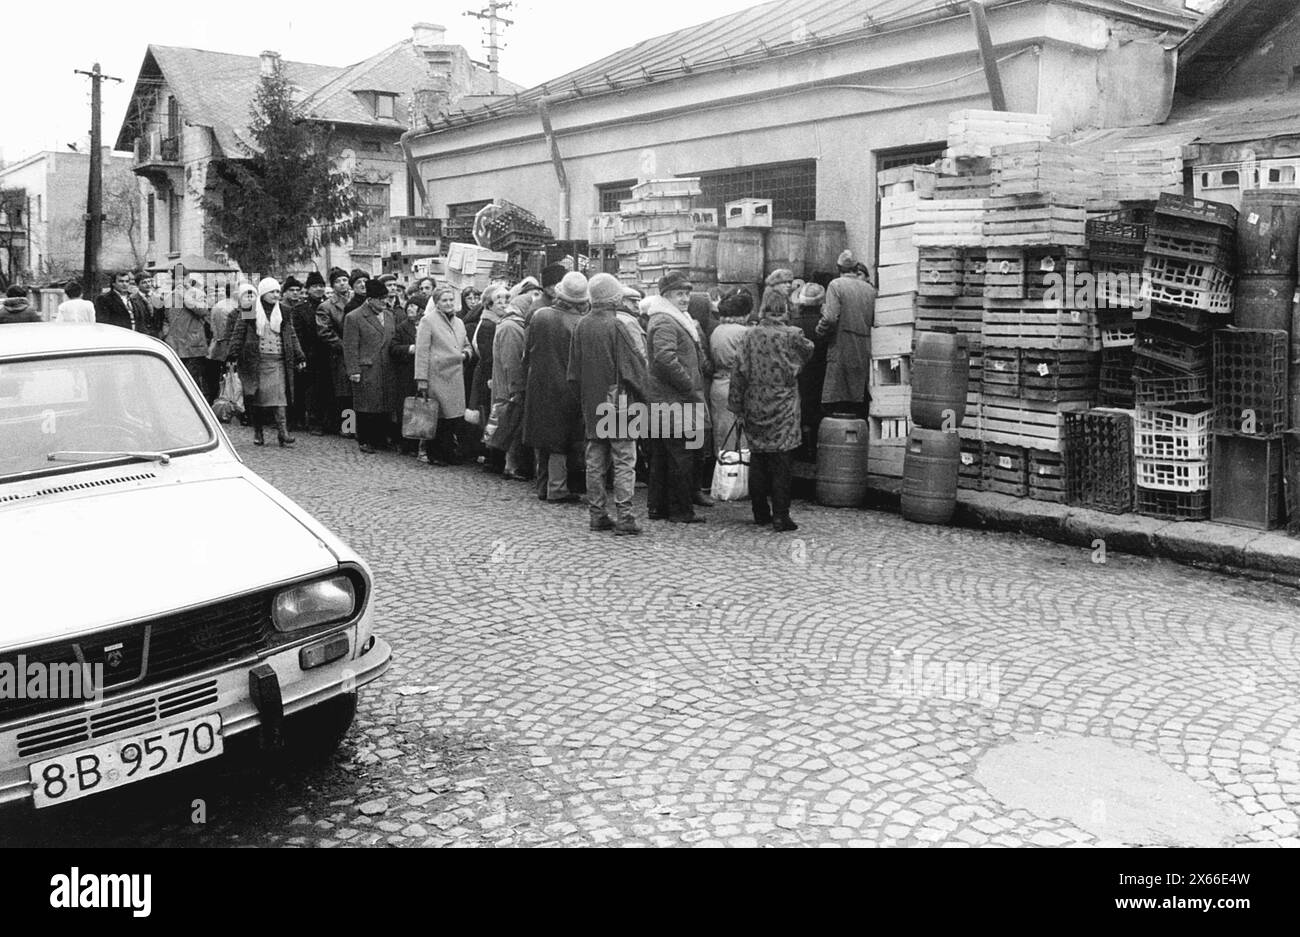 Bucharest, Romania, January 1990. Right after the collapse of the communist regime, people were still waiting in long lines to get a hold of basic groceries. Stock Photo